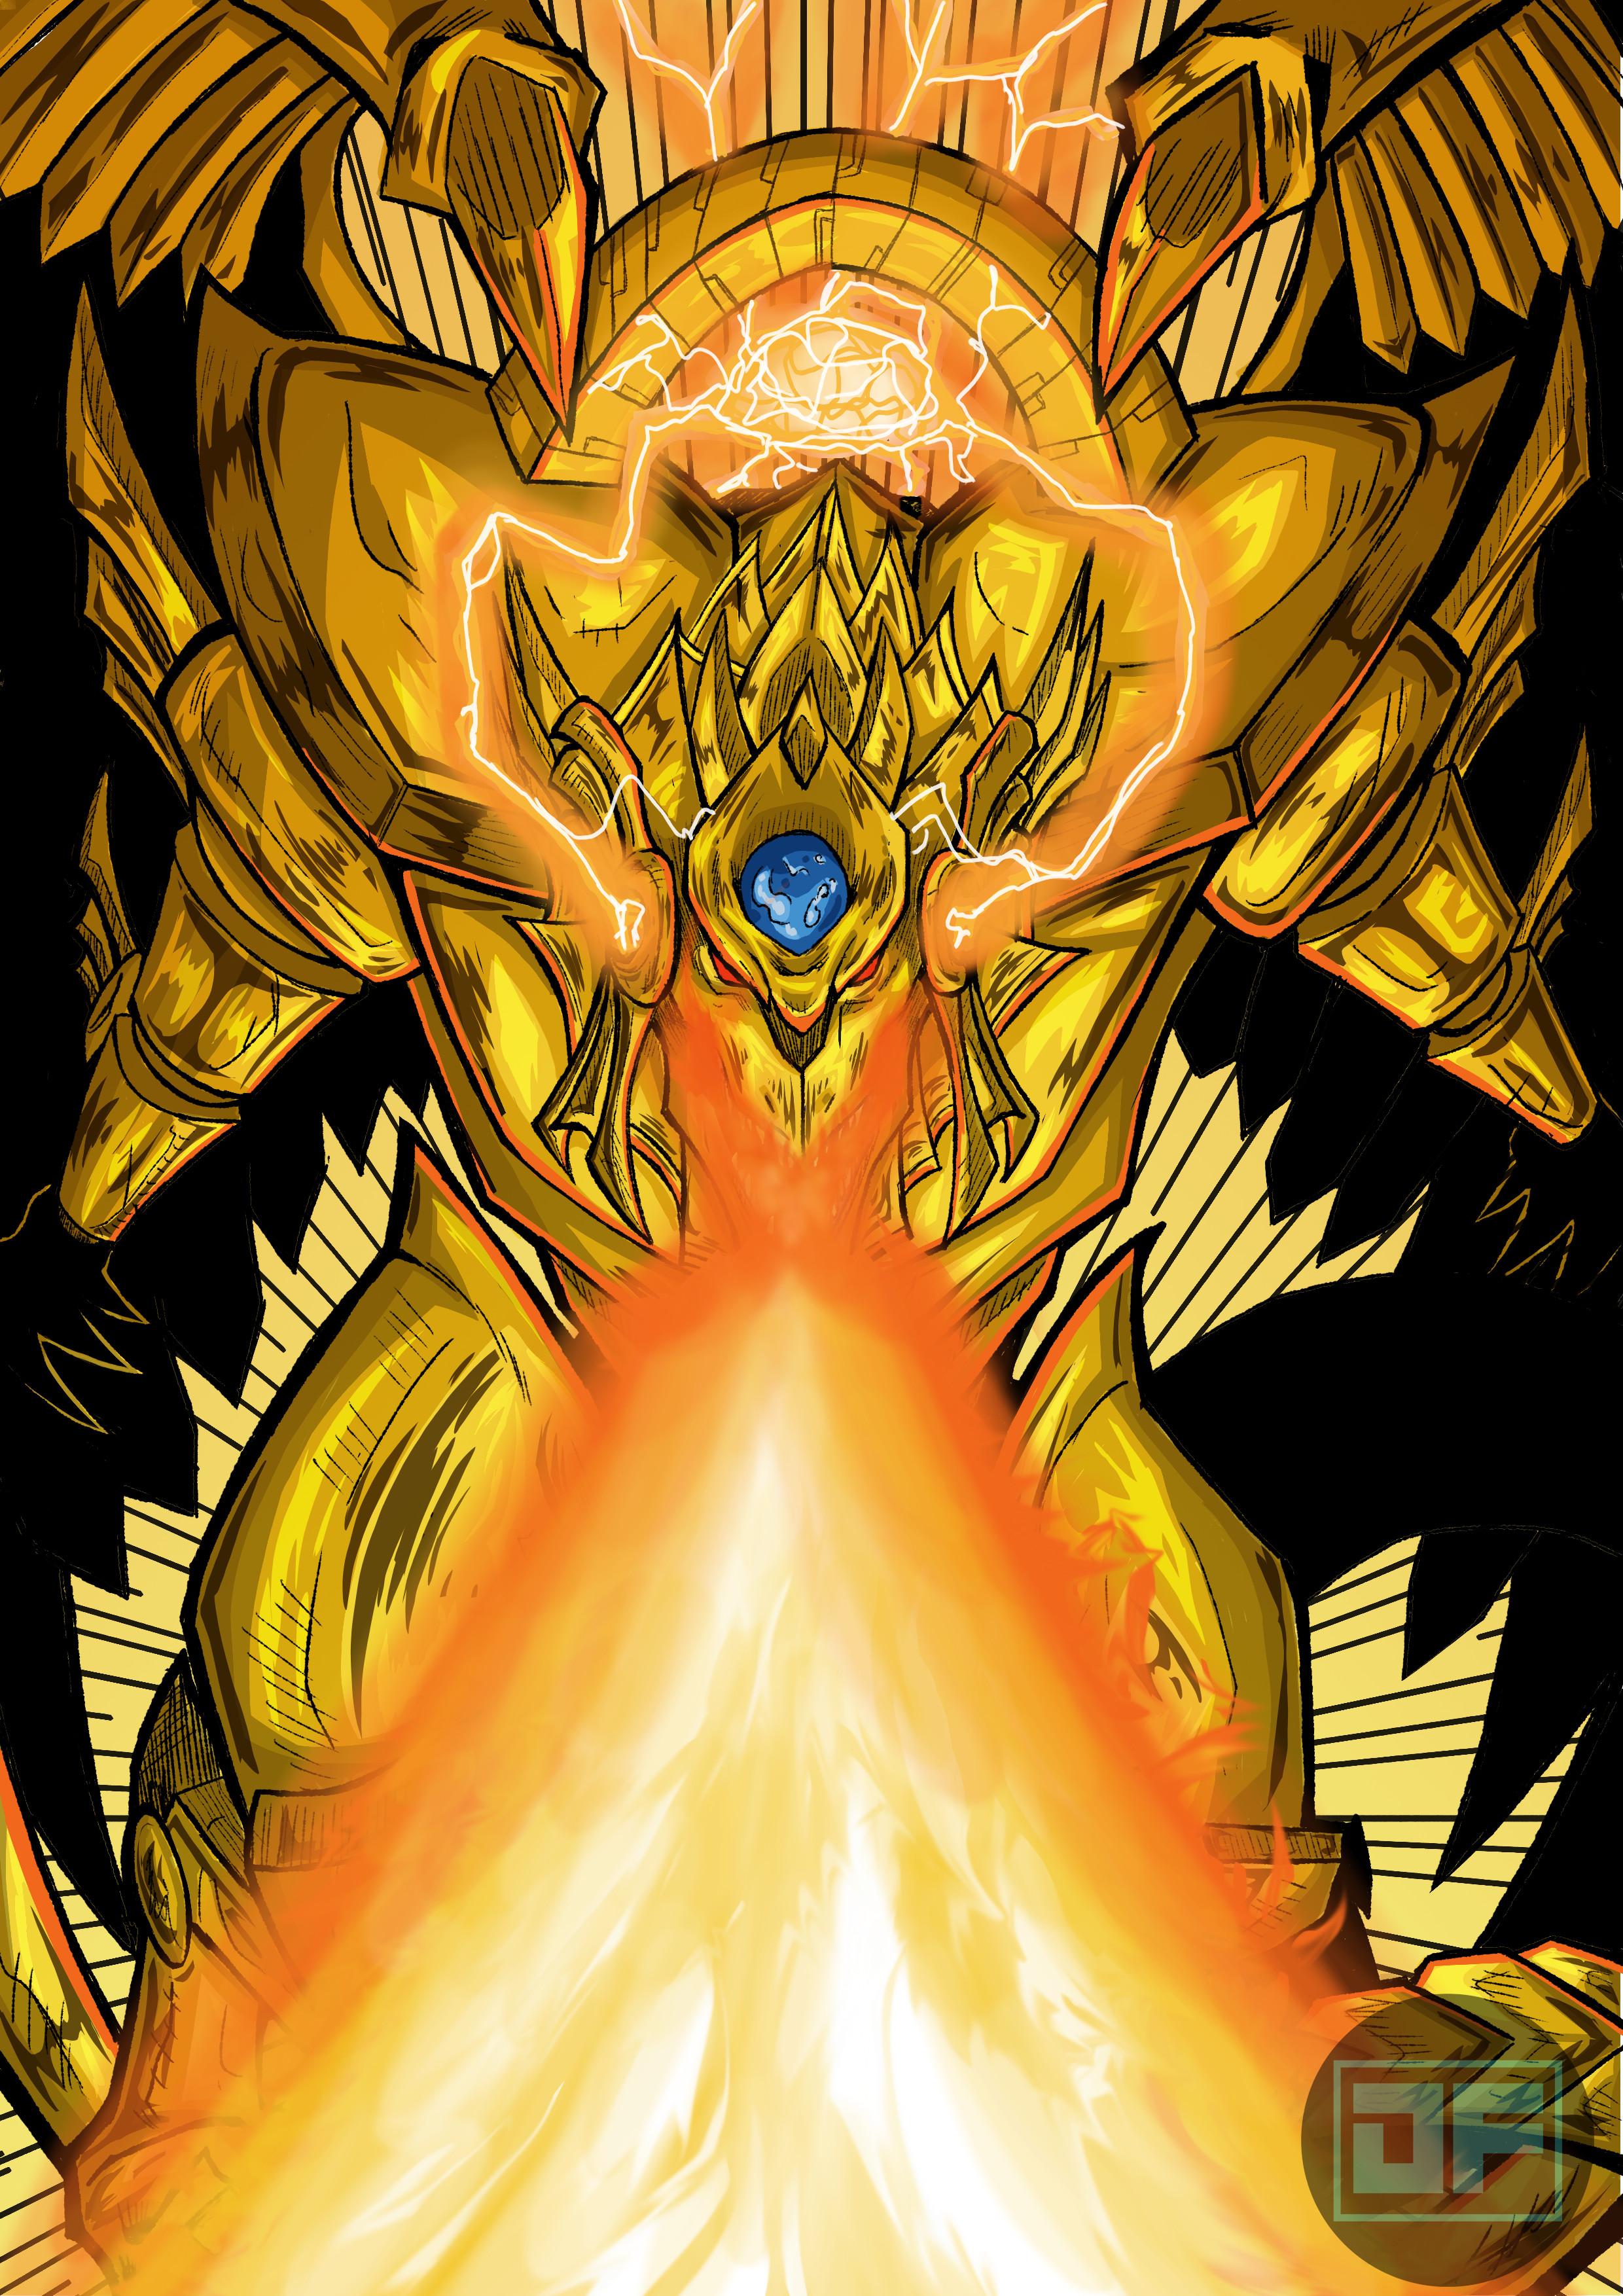 Hey guys last but not least The Winged Dragon Of Ra! thanks